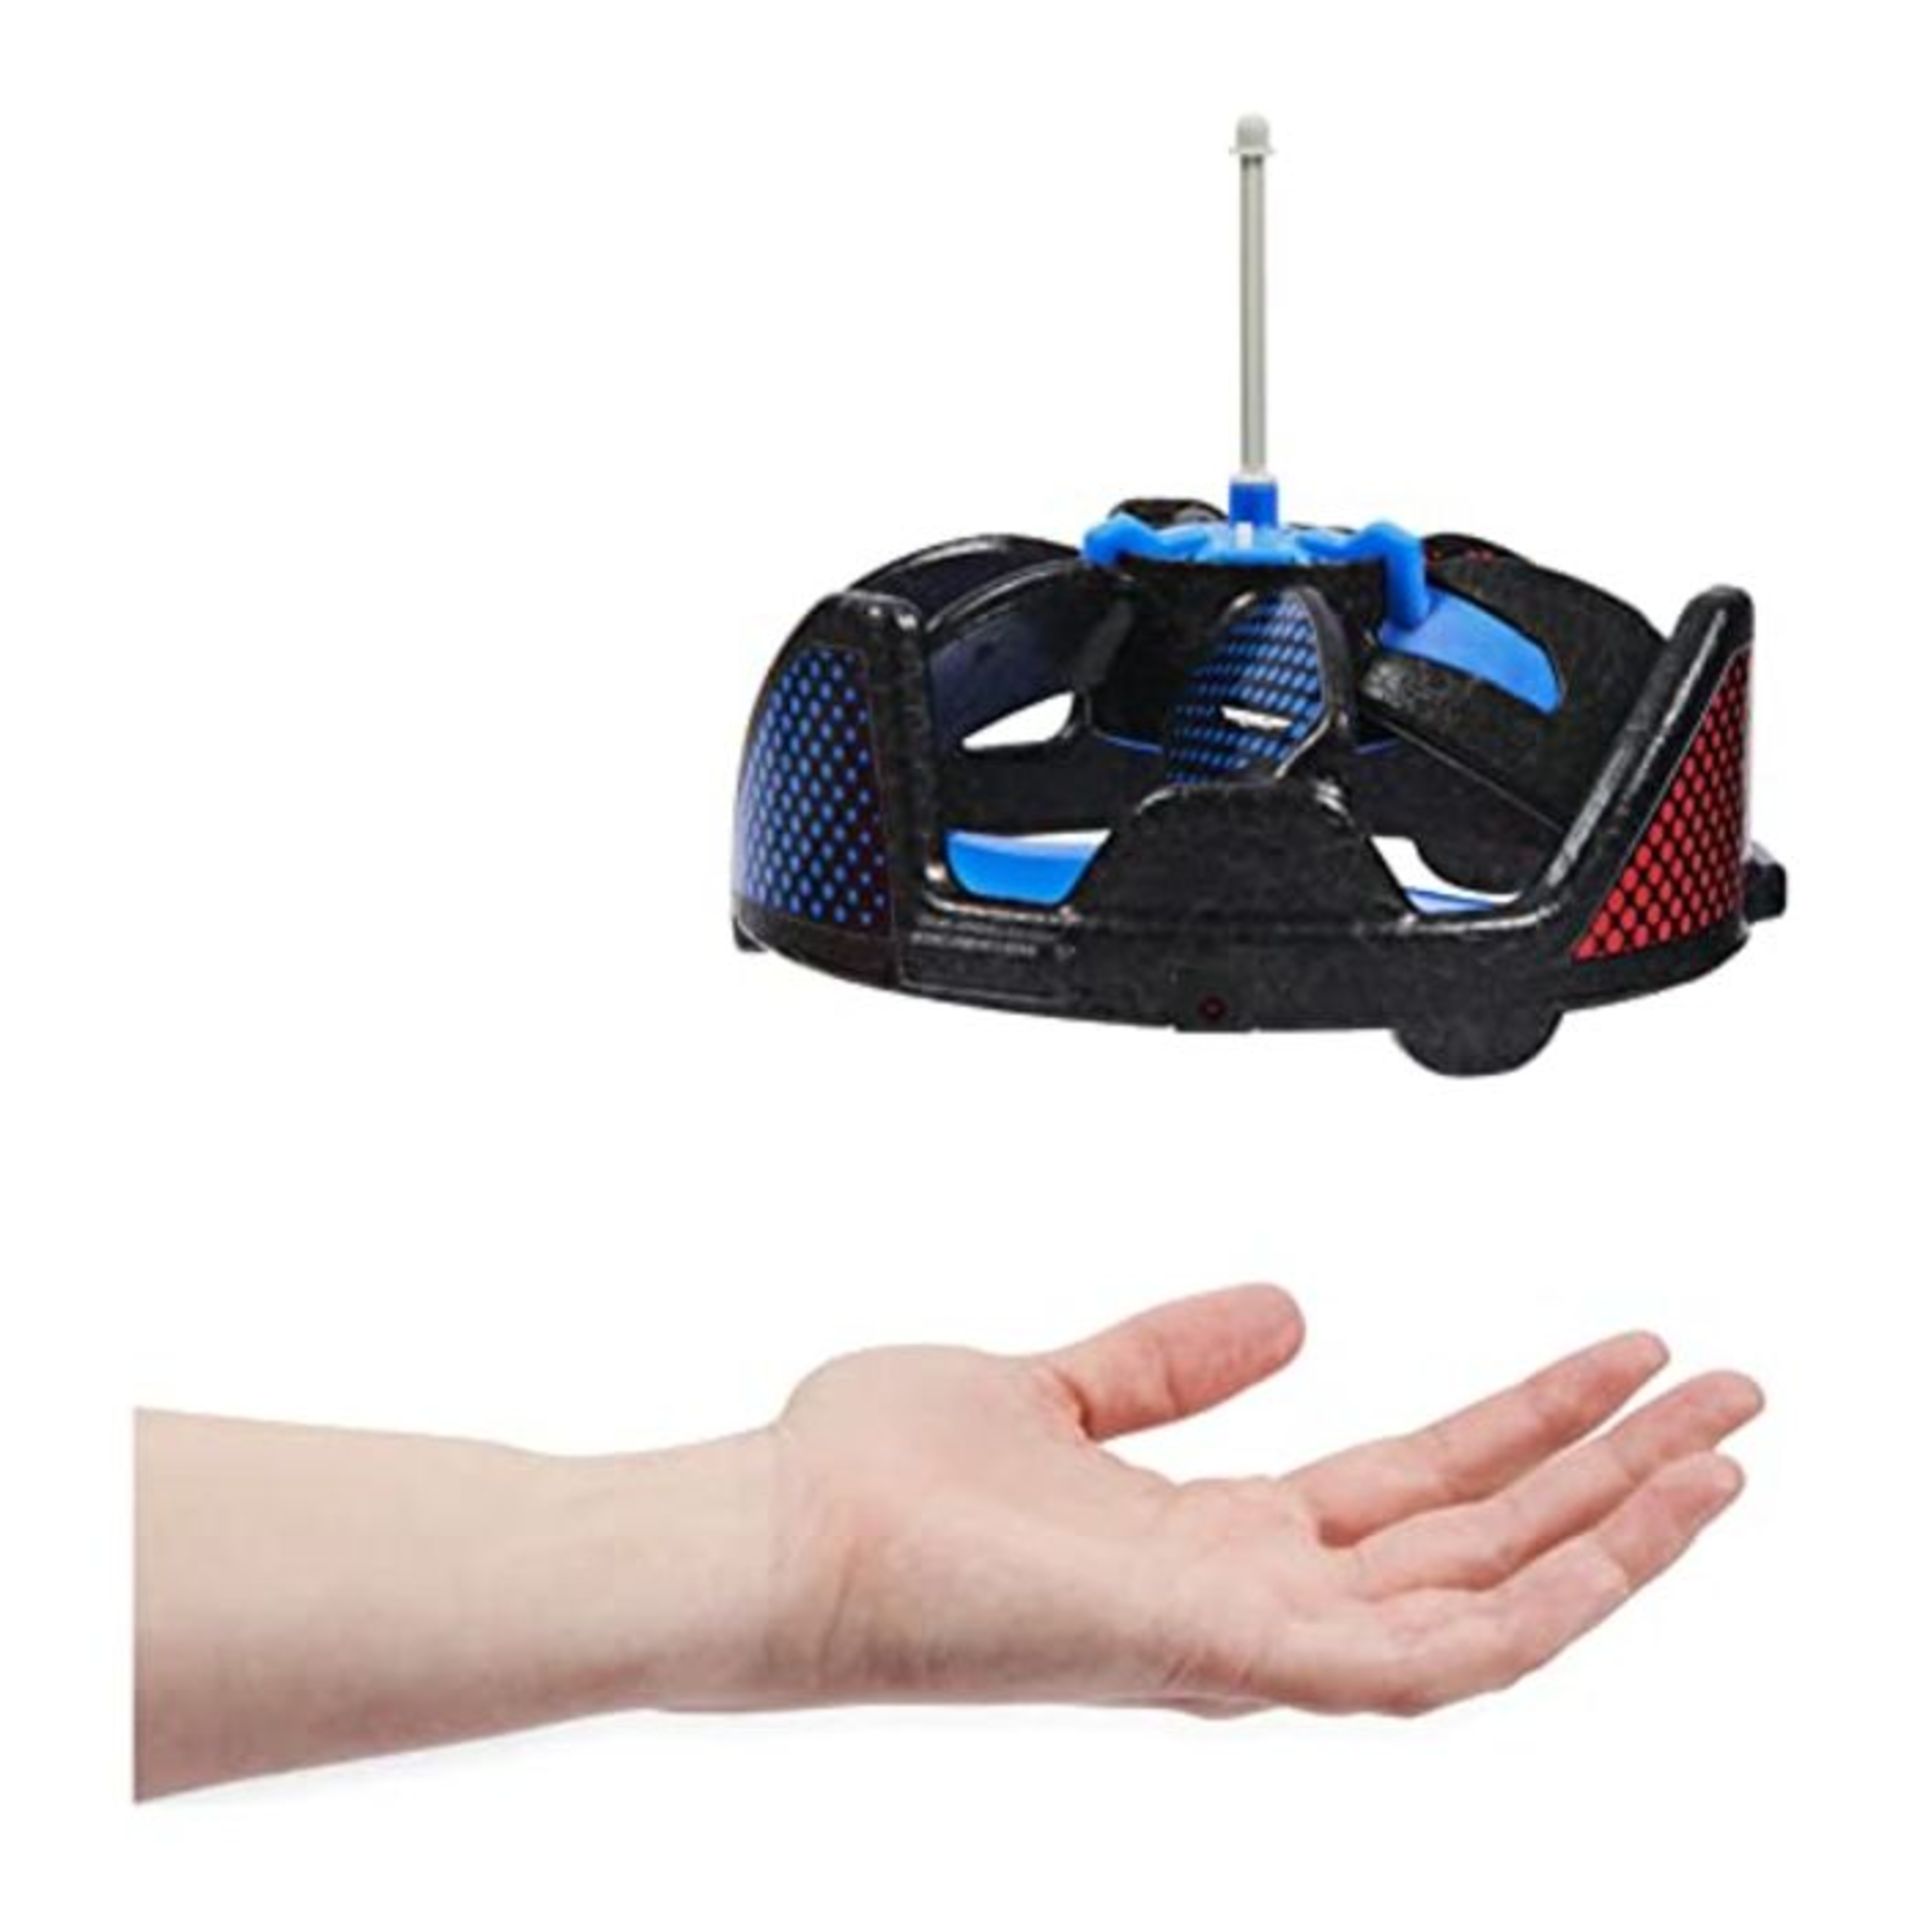 Air Hogs Gravitor with Trick Stick, USB Rechargeable Flying Toys, Drones for Kids aged